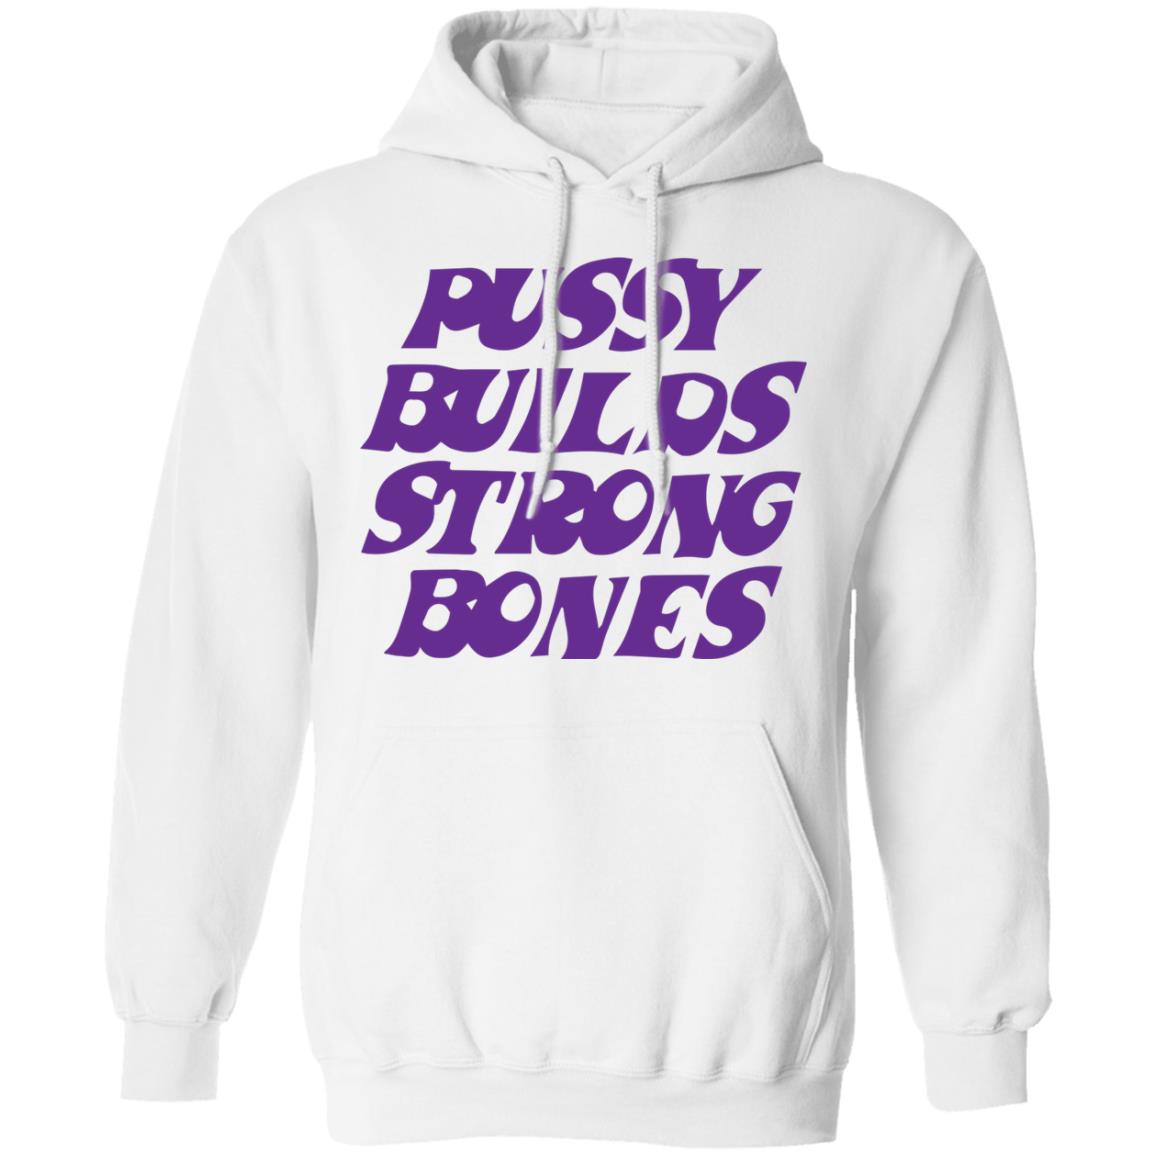 Puusy Builds Strong Bones Shirt 2